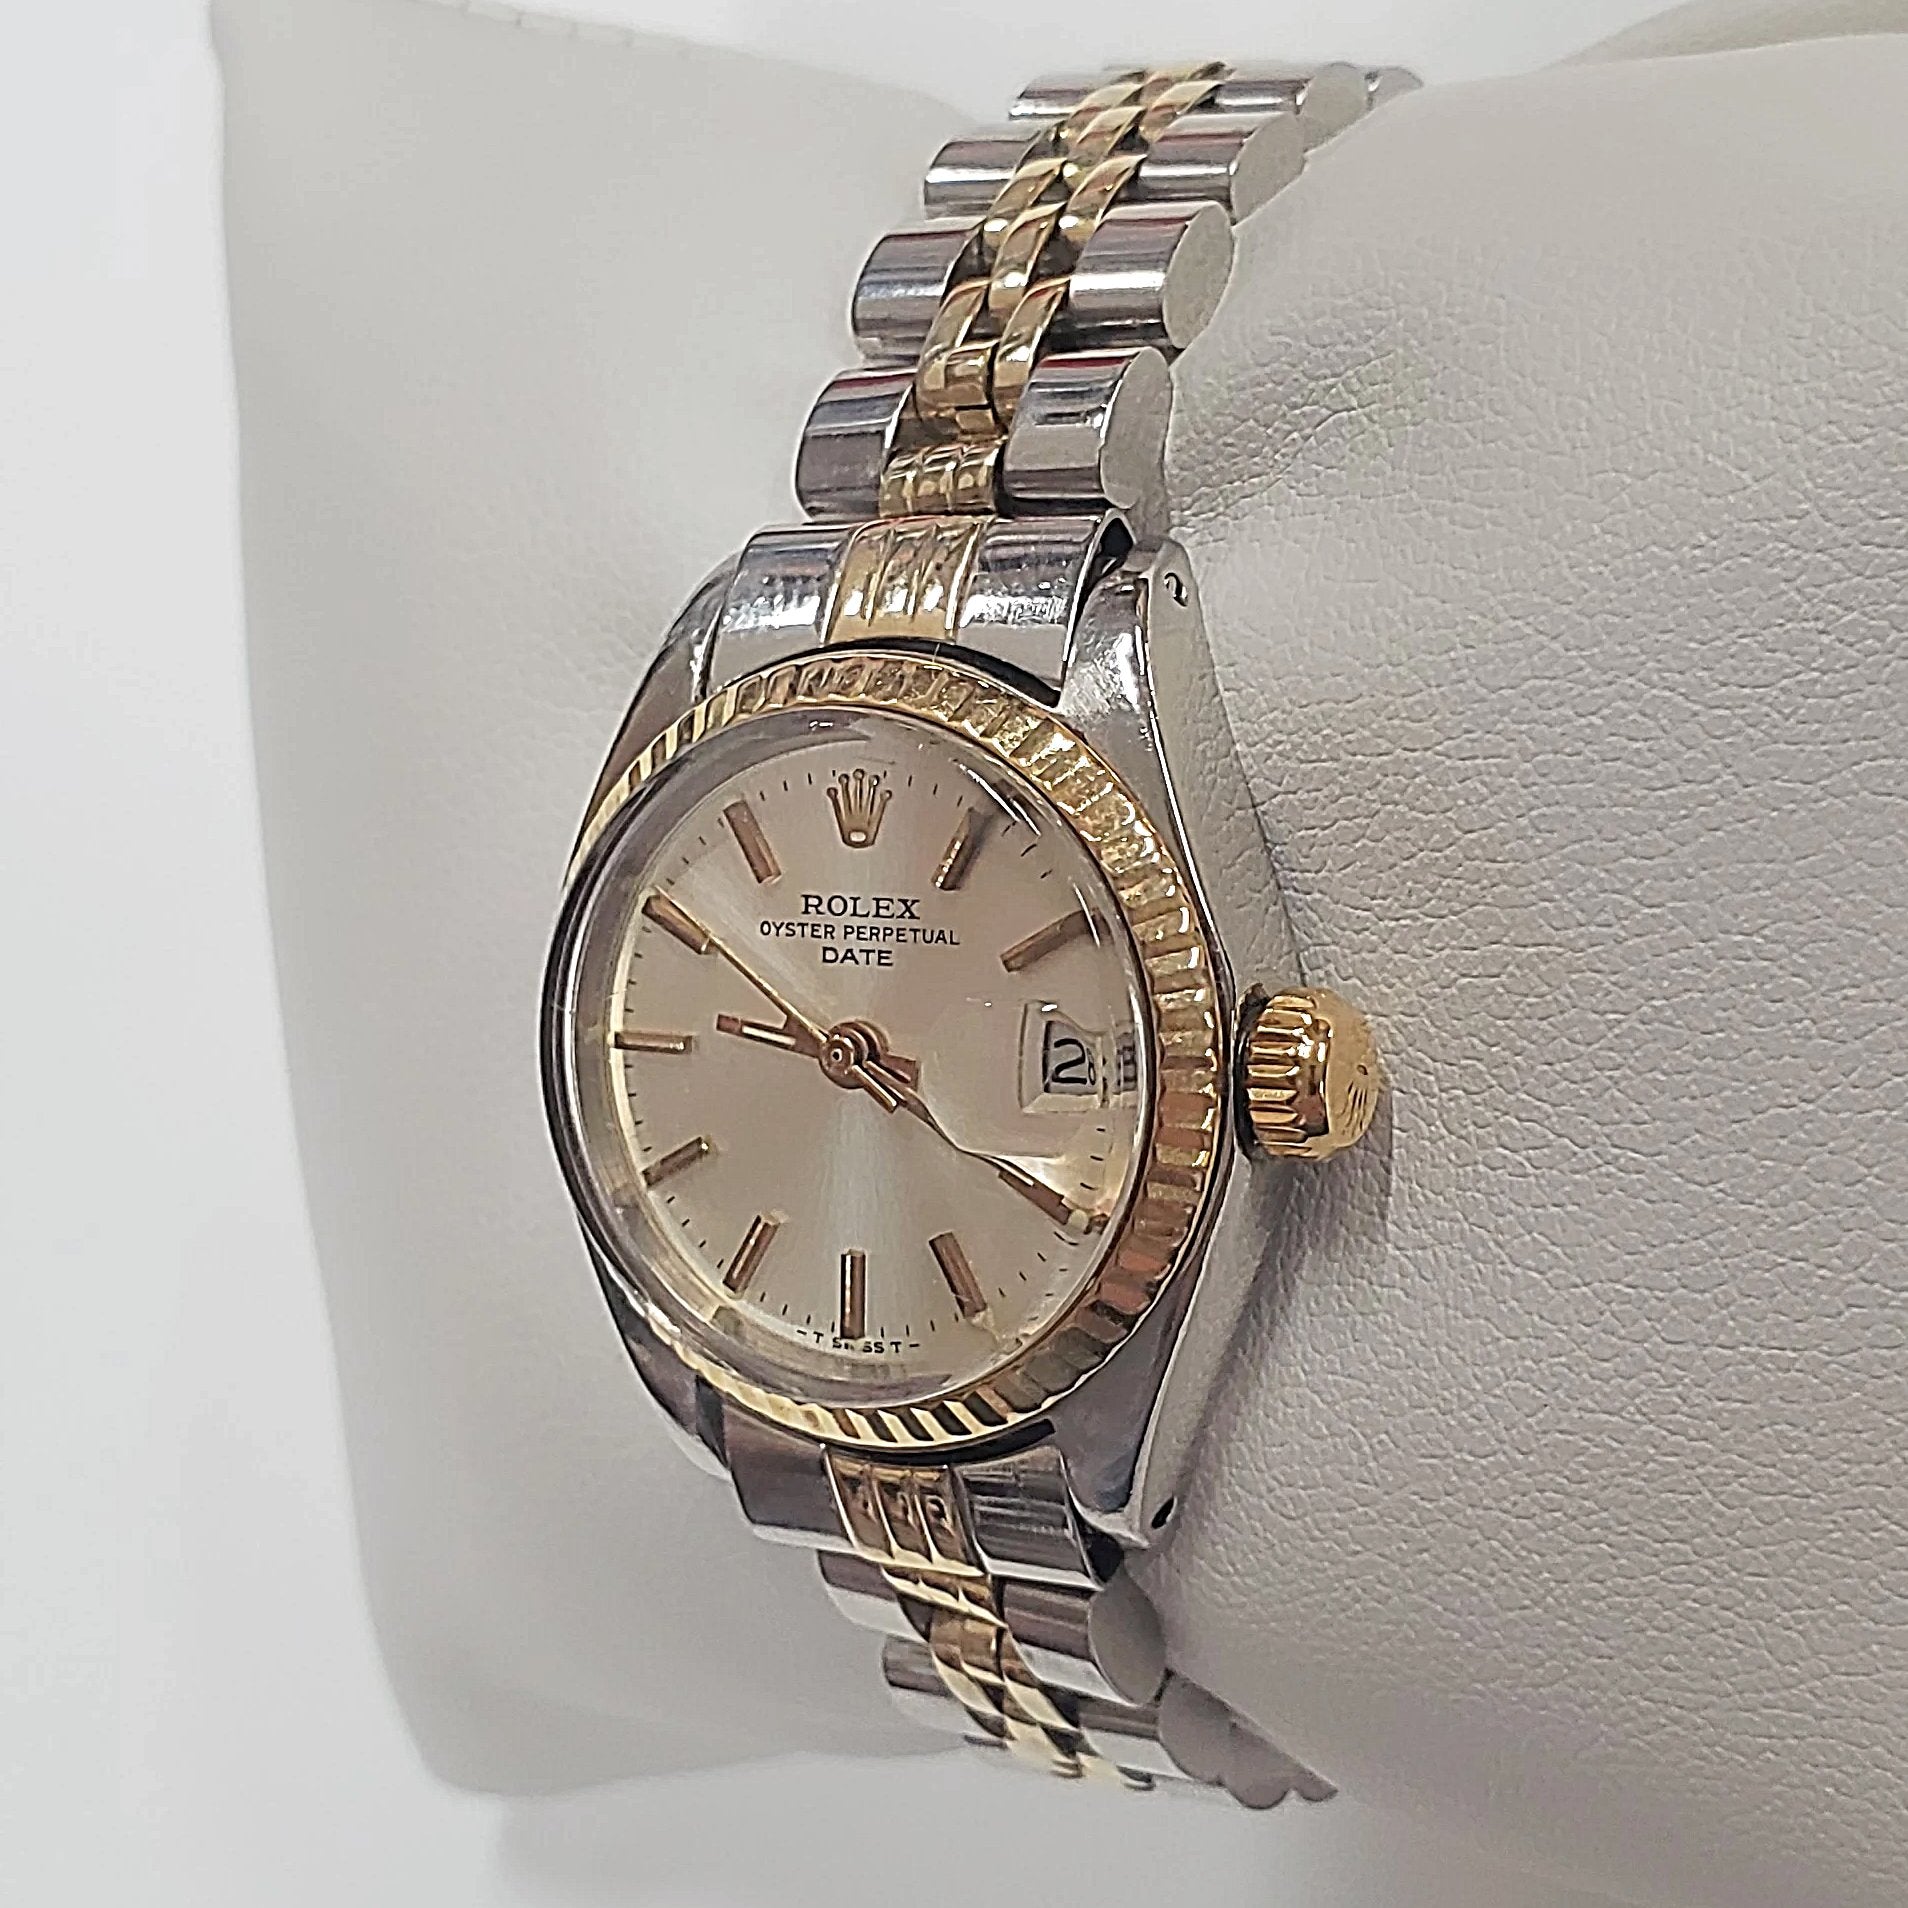 Women's Two-Tone Rolex Watch 26mm DateJust 14K Gold Watch with Silver Dial and 14k Fluted Bezel. (Pre-Owned)